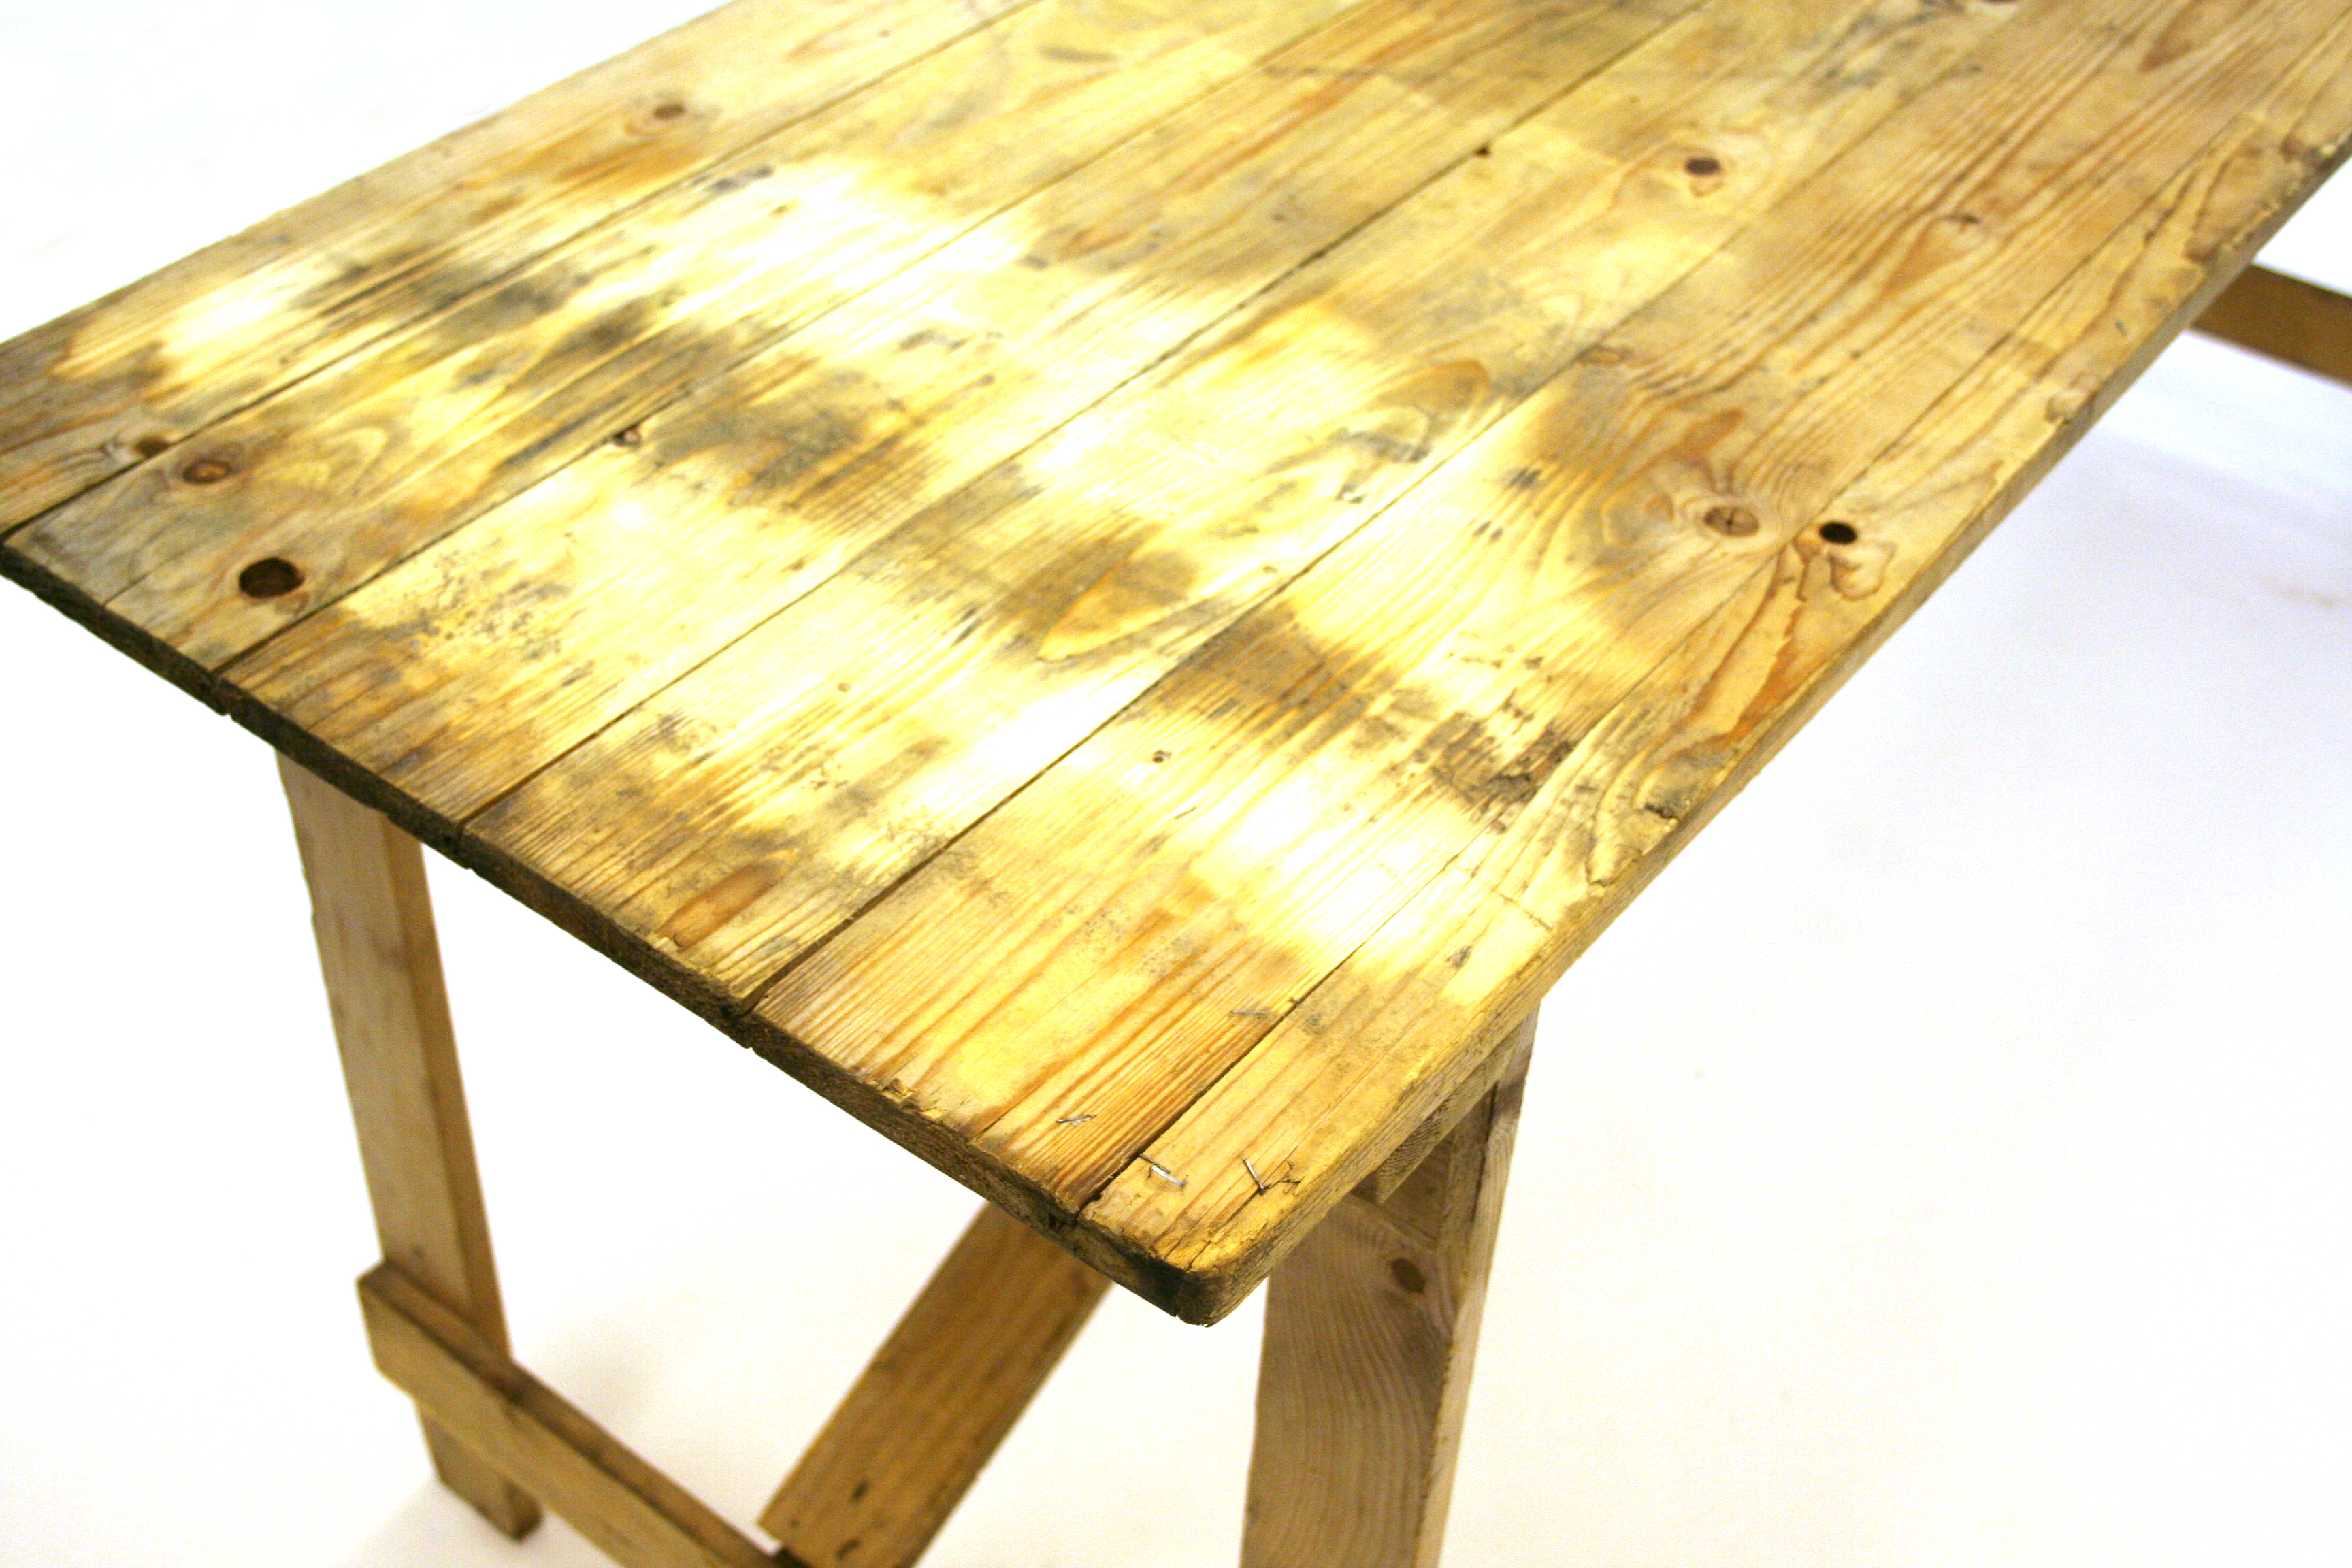 Wooden trestle table measuring 6' x 2' - BE Event Hire